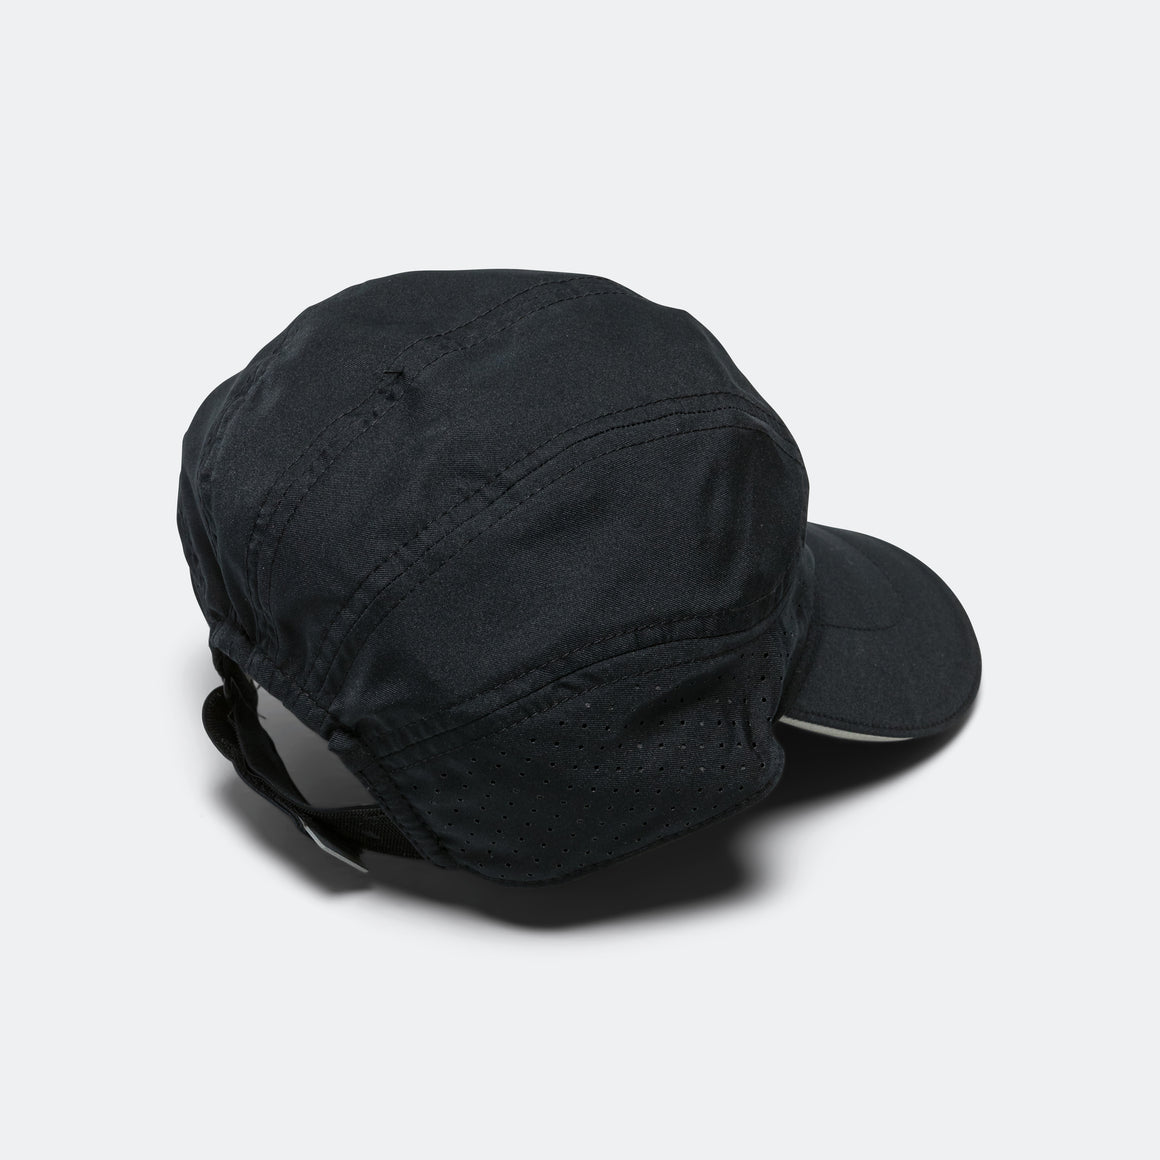 Nike - Dri-FIT ADV Fly Cap - Black/White - Up There Athletics